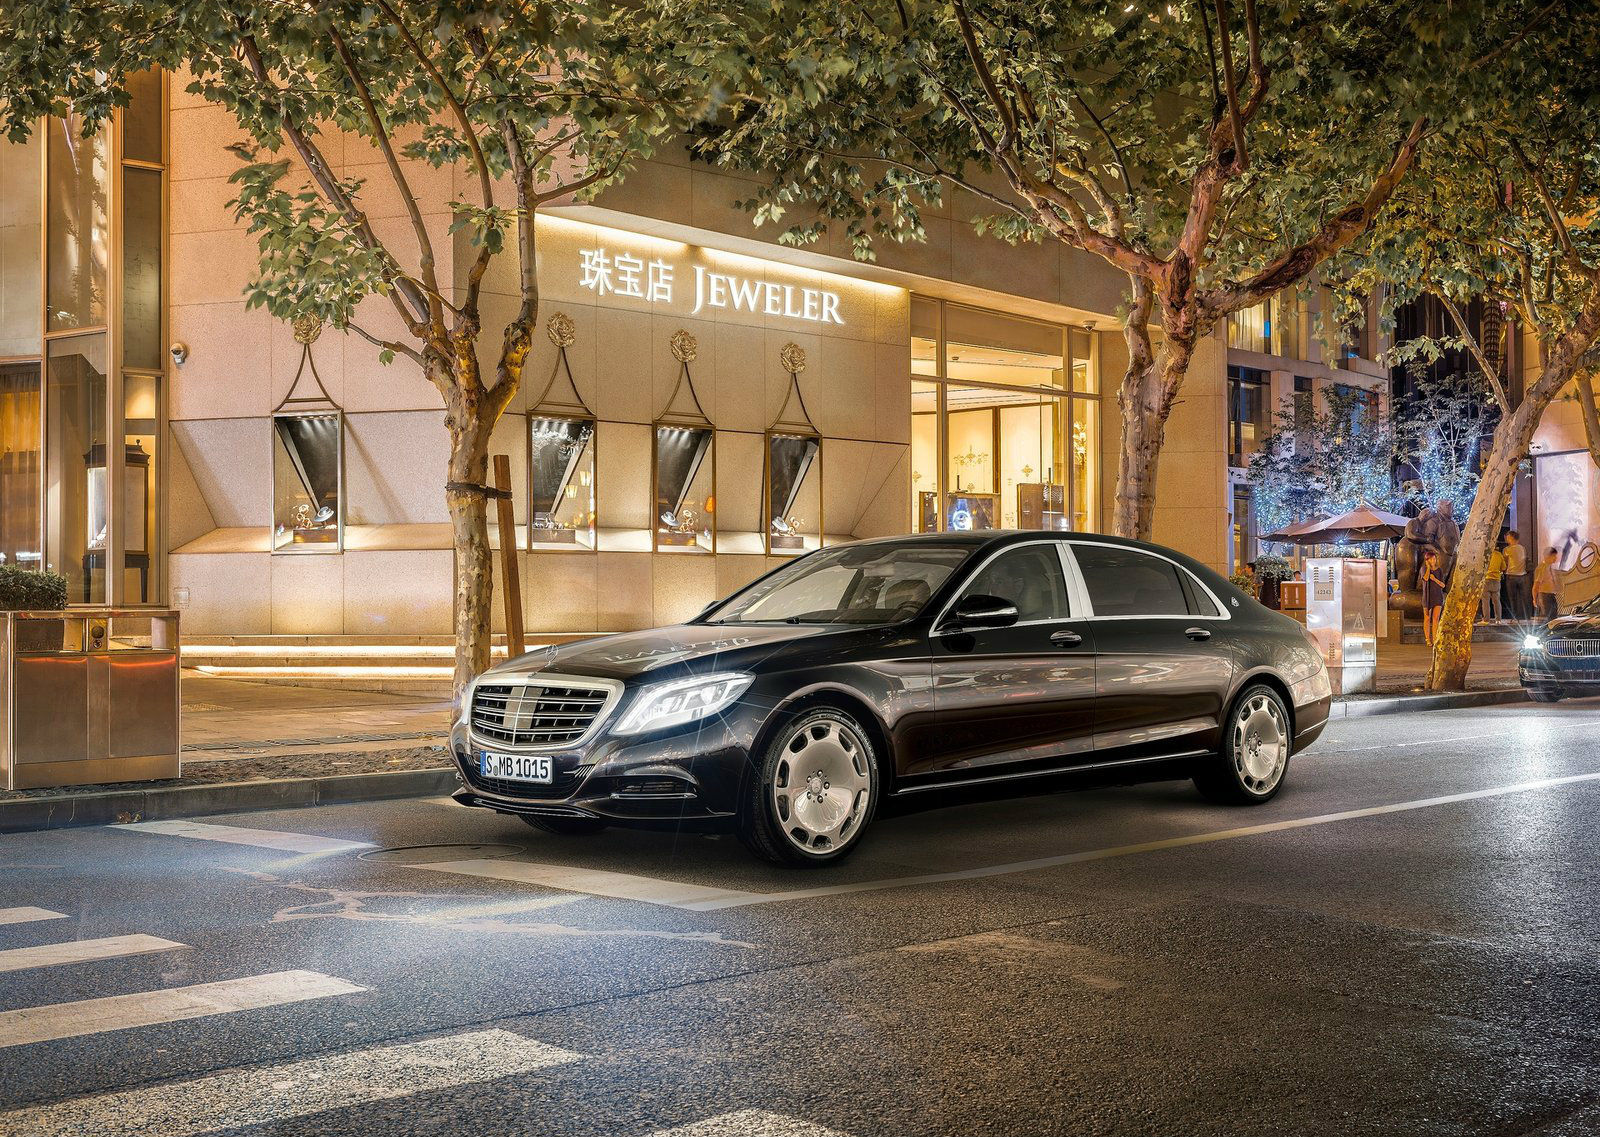 Mercedes-Maybach Releases New Images of S-Class